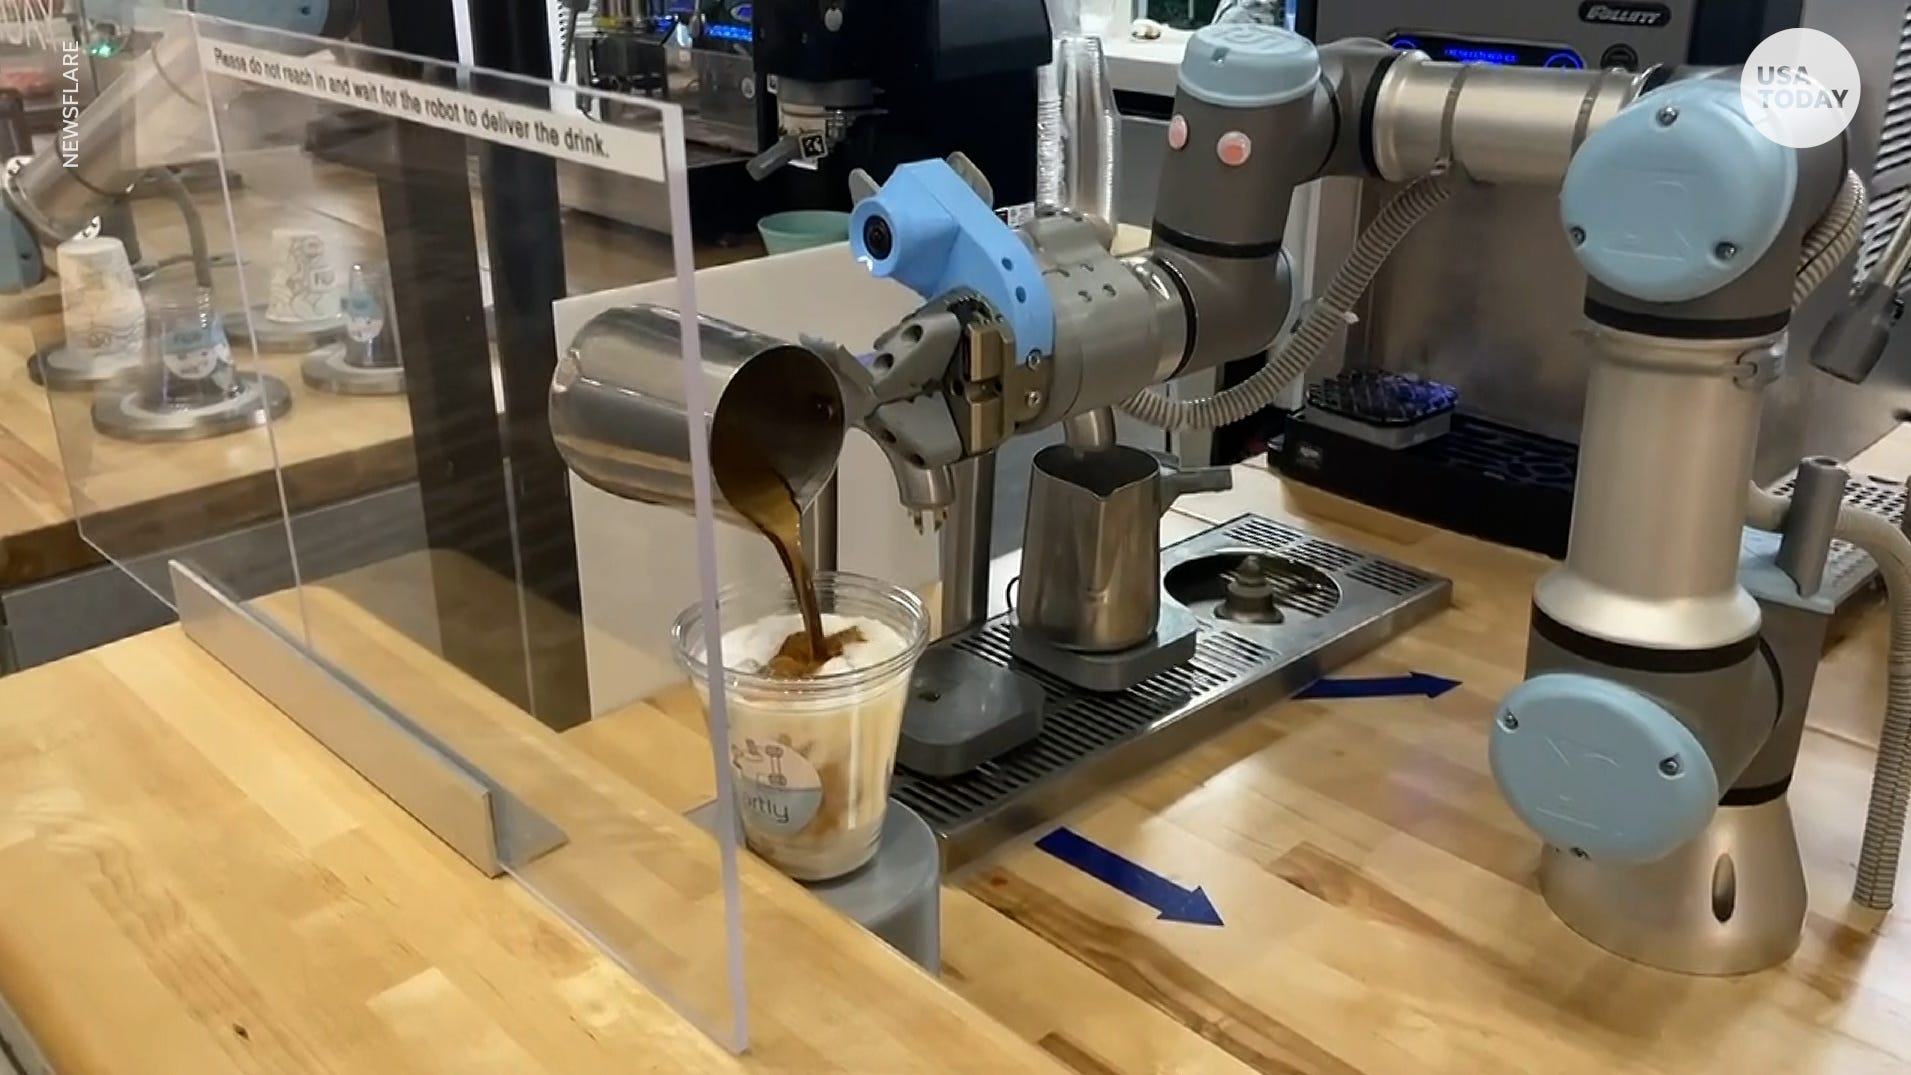 california-cafe-installs-new-innovative-robot-baristas-to-take-orders-serve-customers